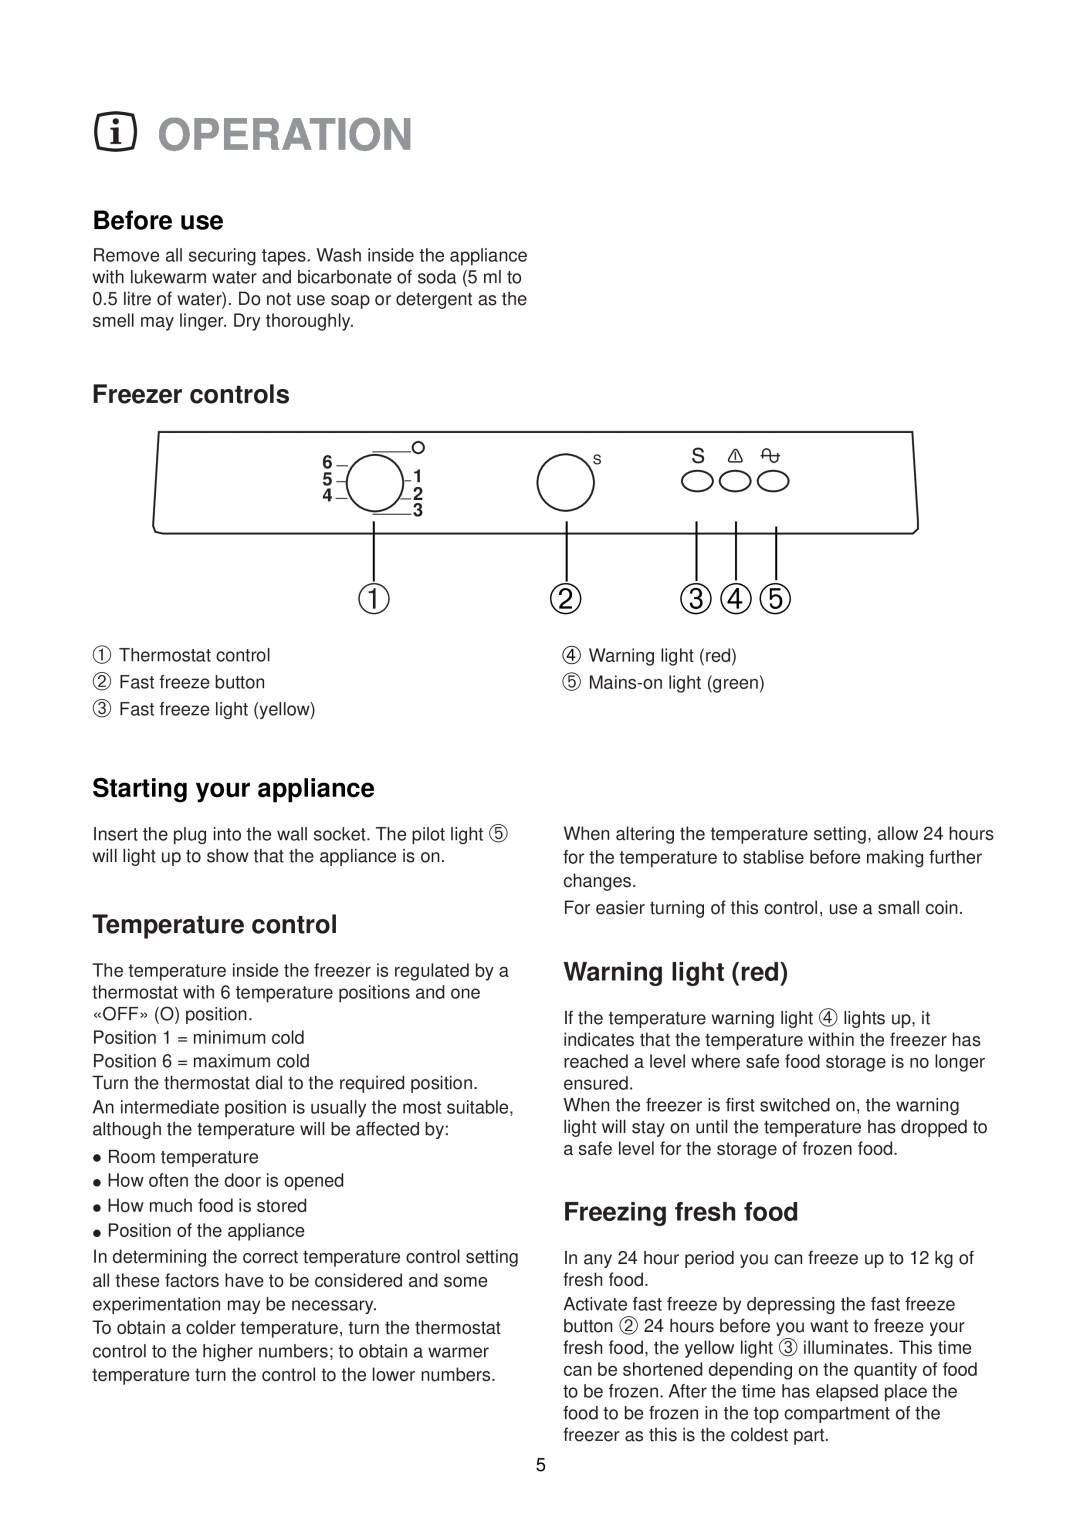 Zanussi CF 50 SI Operation, Before use, Freezer controls, Starting your appliance, Temperature control, Warning light red 